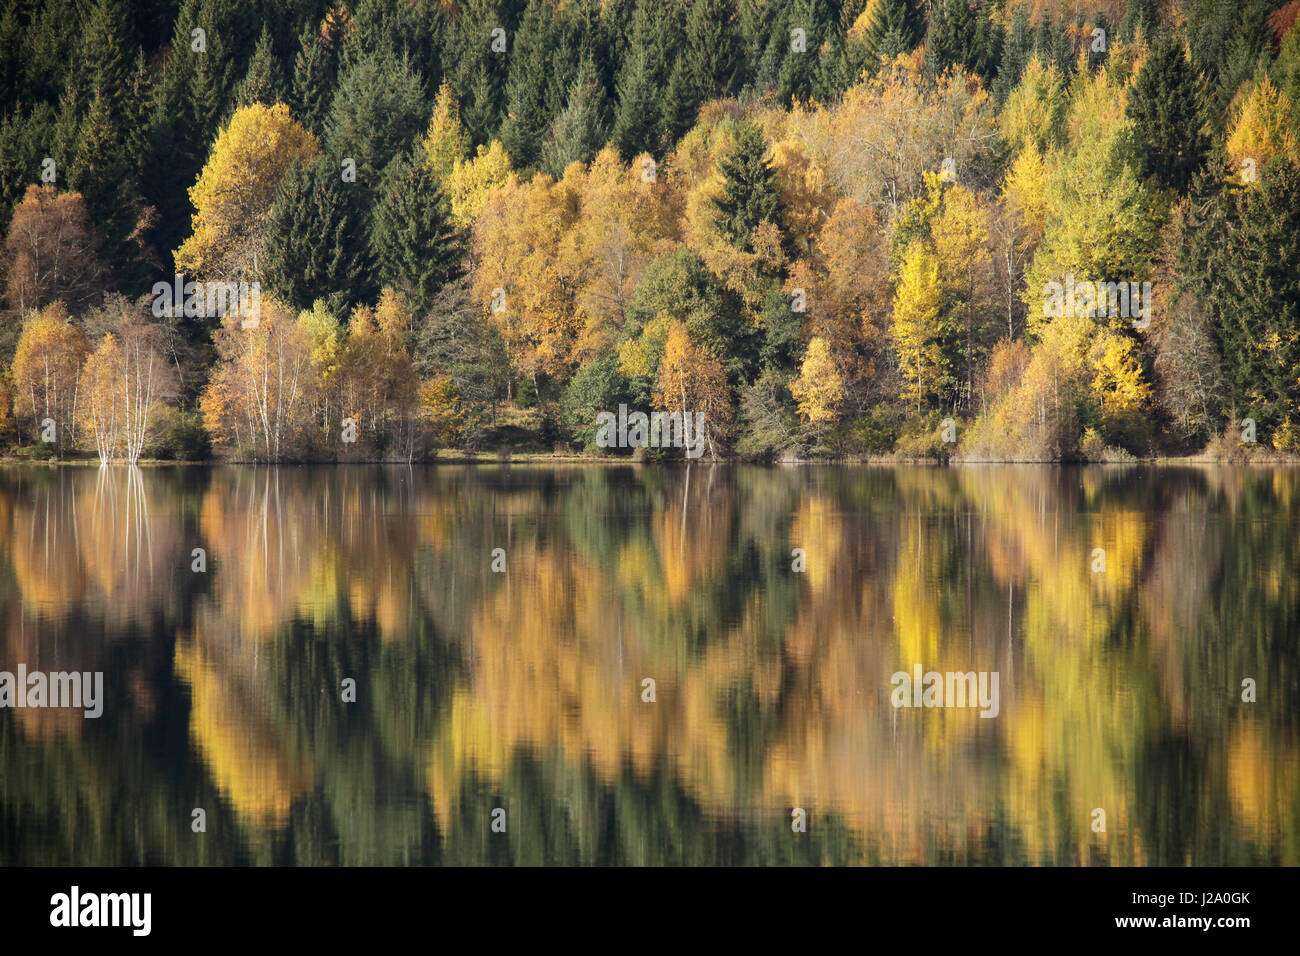 A quiet autumn day at the Schluchsee. Reflection of birches and pines in the smooth water. Stock Photo